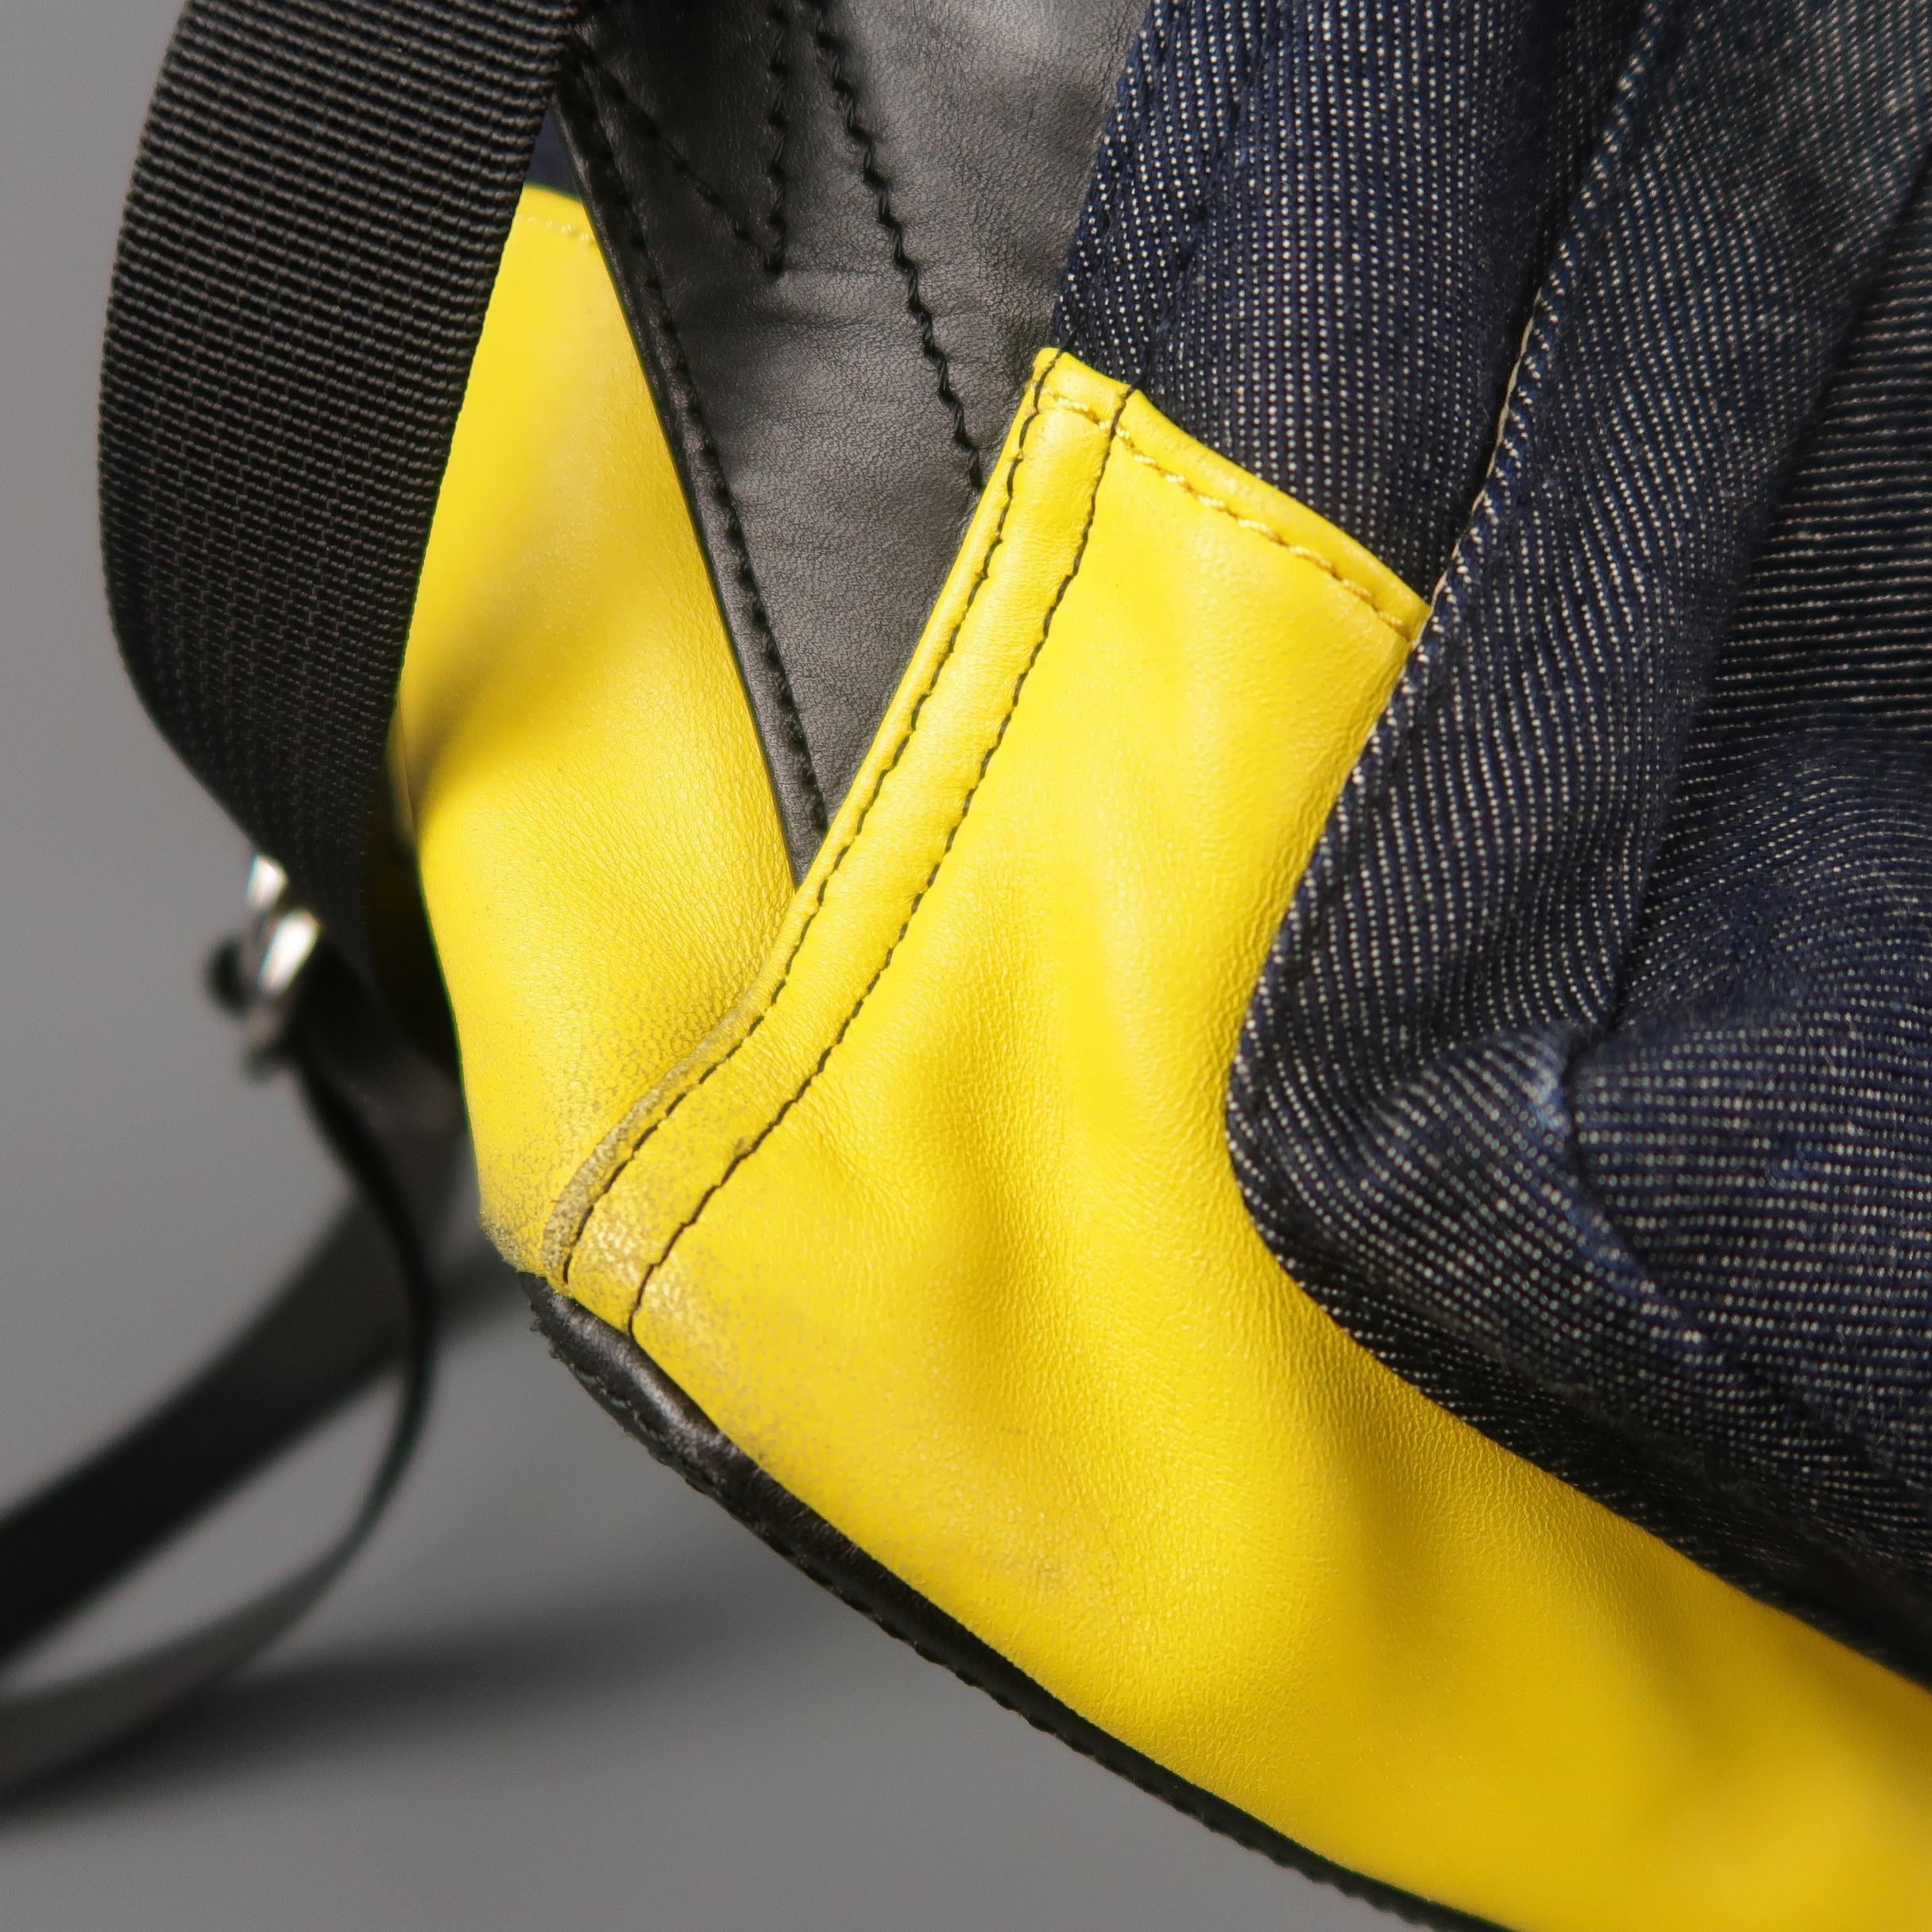 DSQUARED2 Navy Denim & Yellow Leather Backpack 1